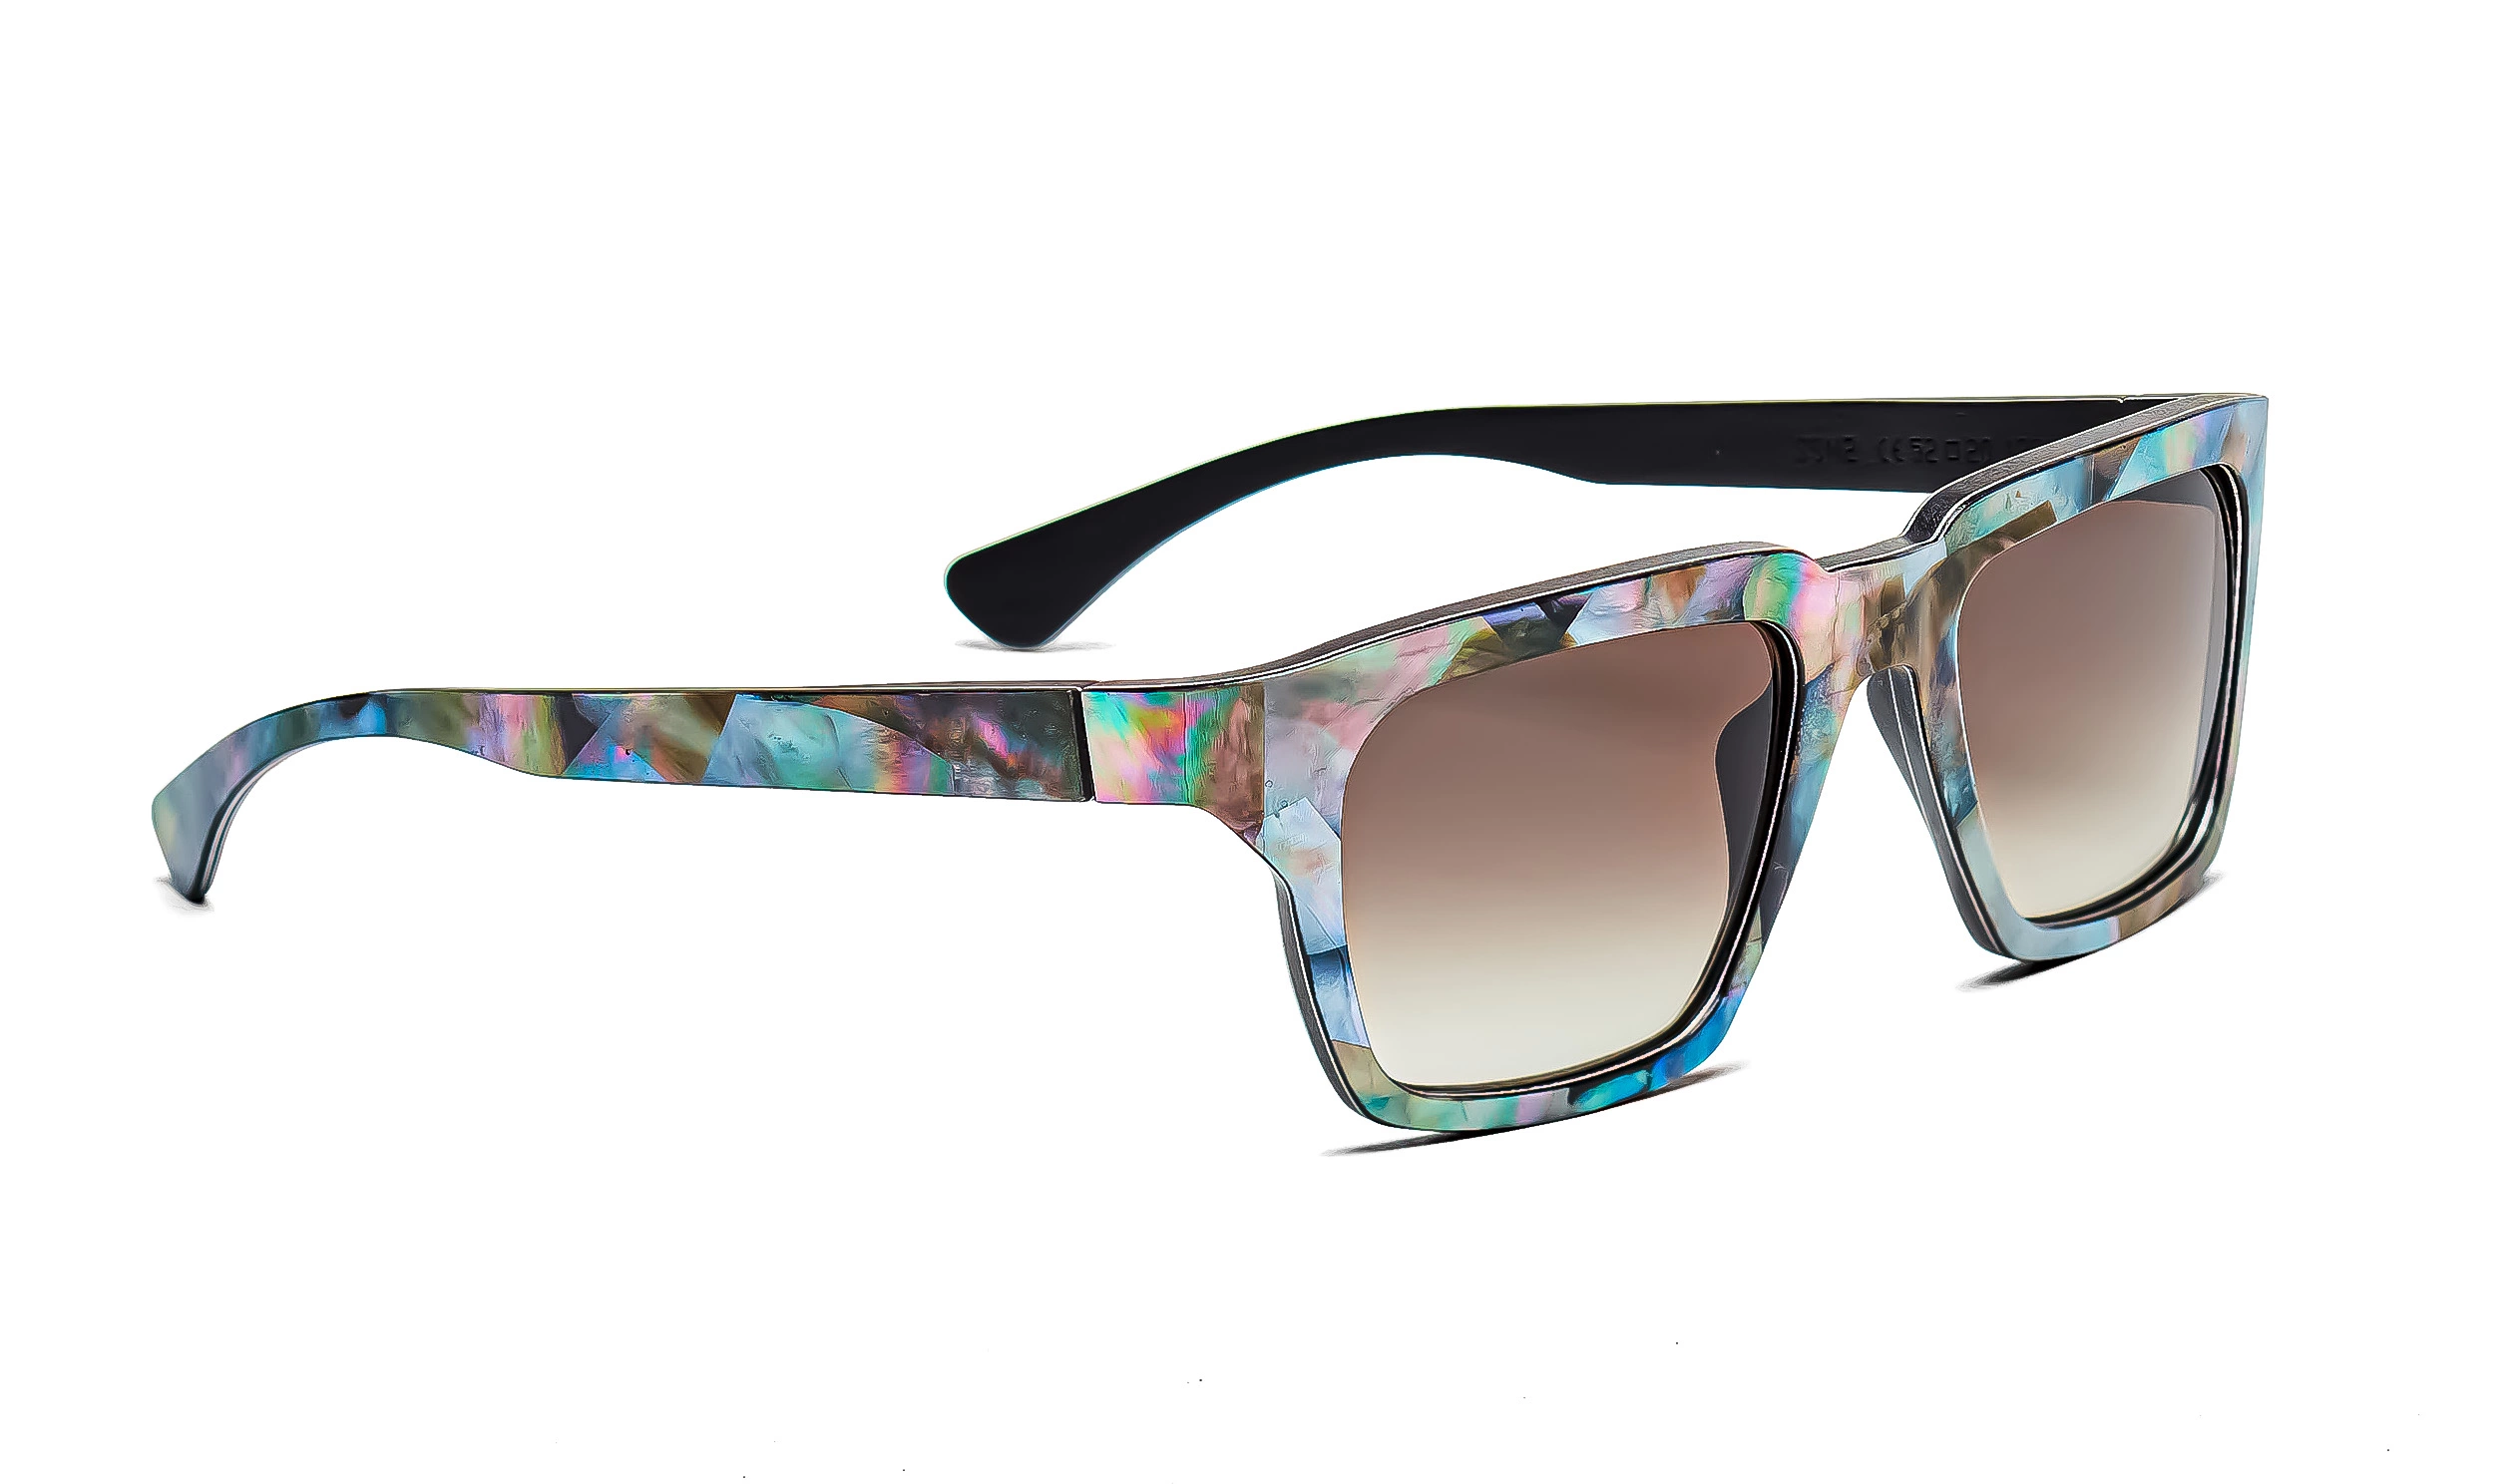 a pair of mother of pearl sunglasses with a colorful frame